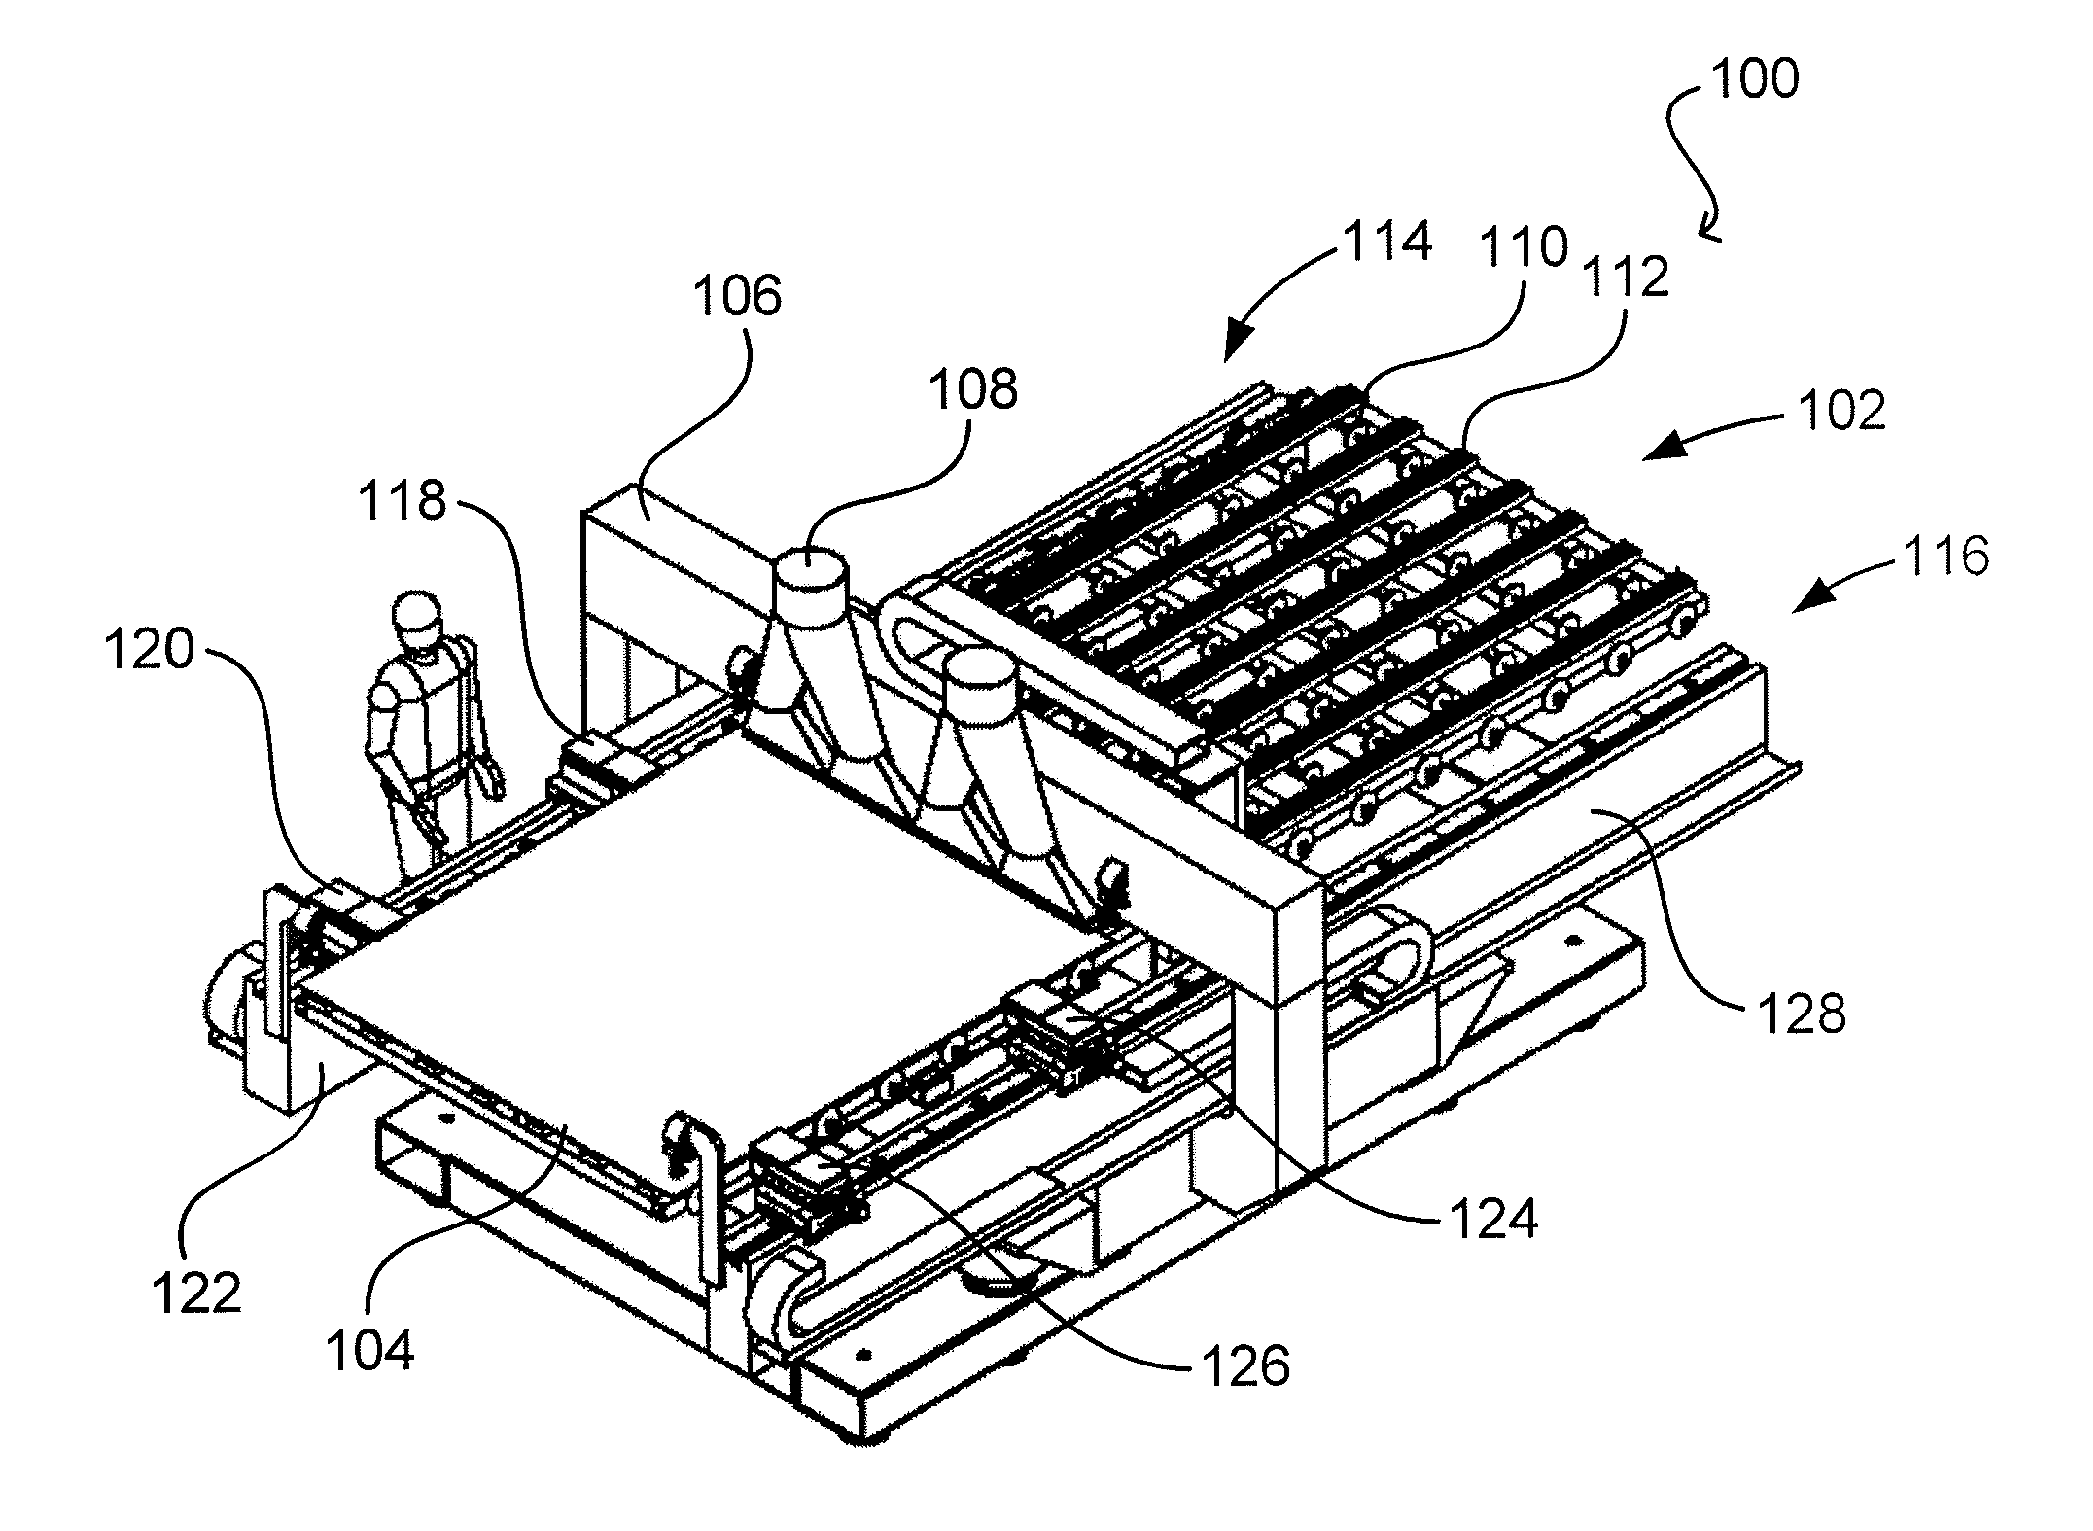 Laser modules and processes for thin film solar panel laser scribing